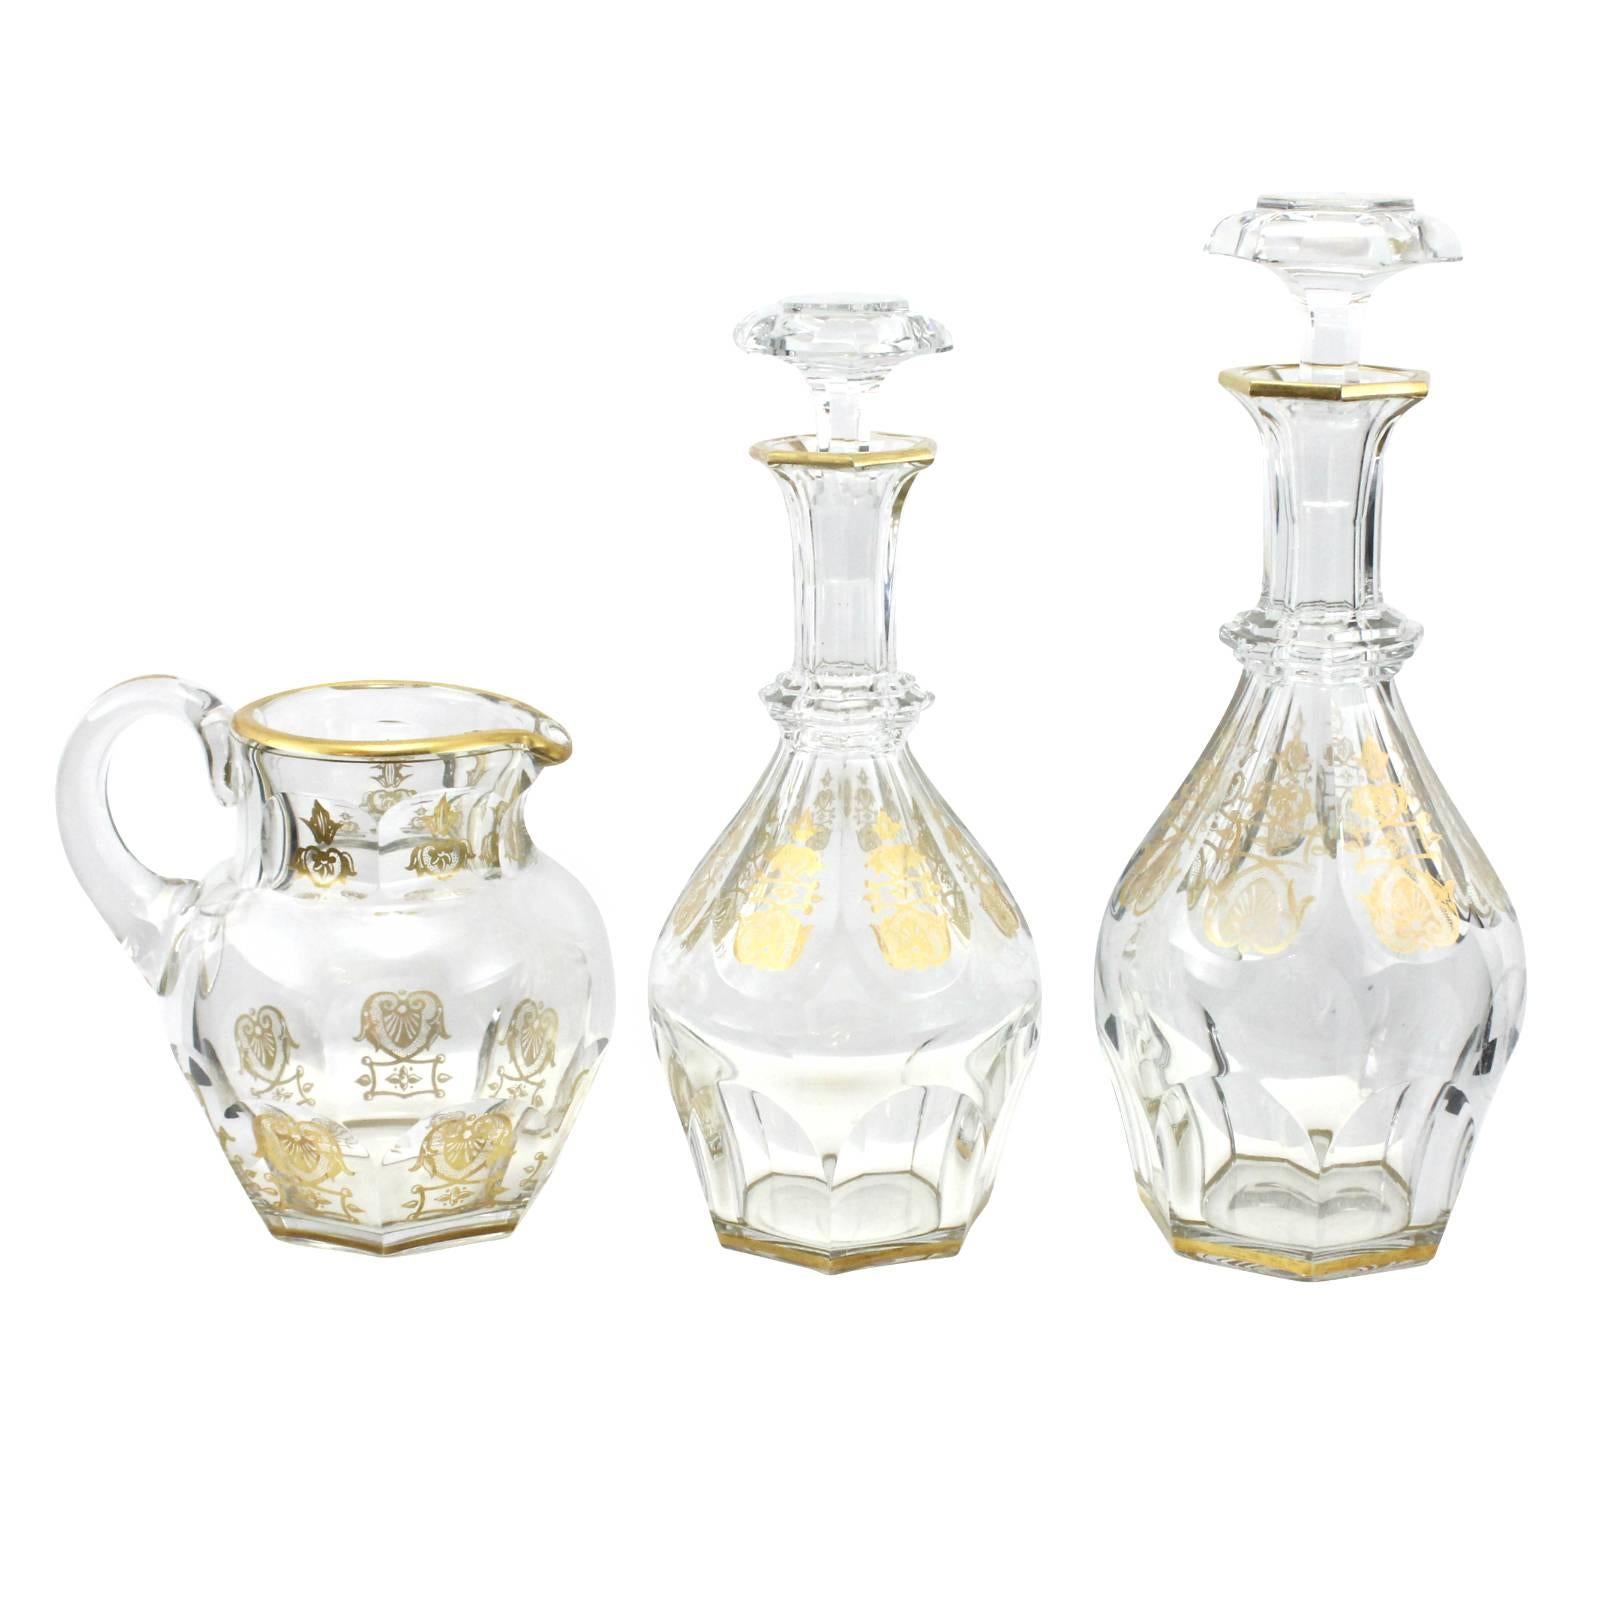 A 54-piece set of Baccarat crystal in the 